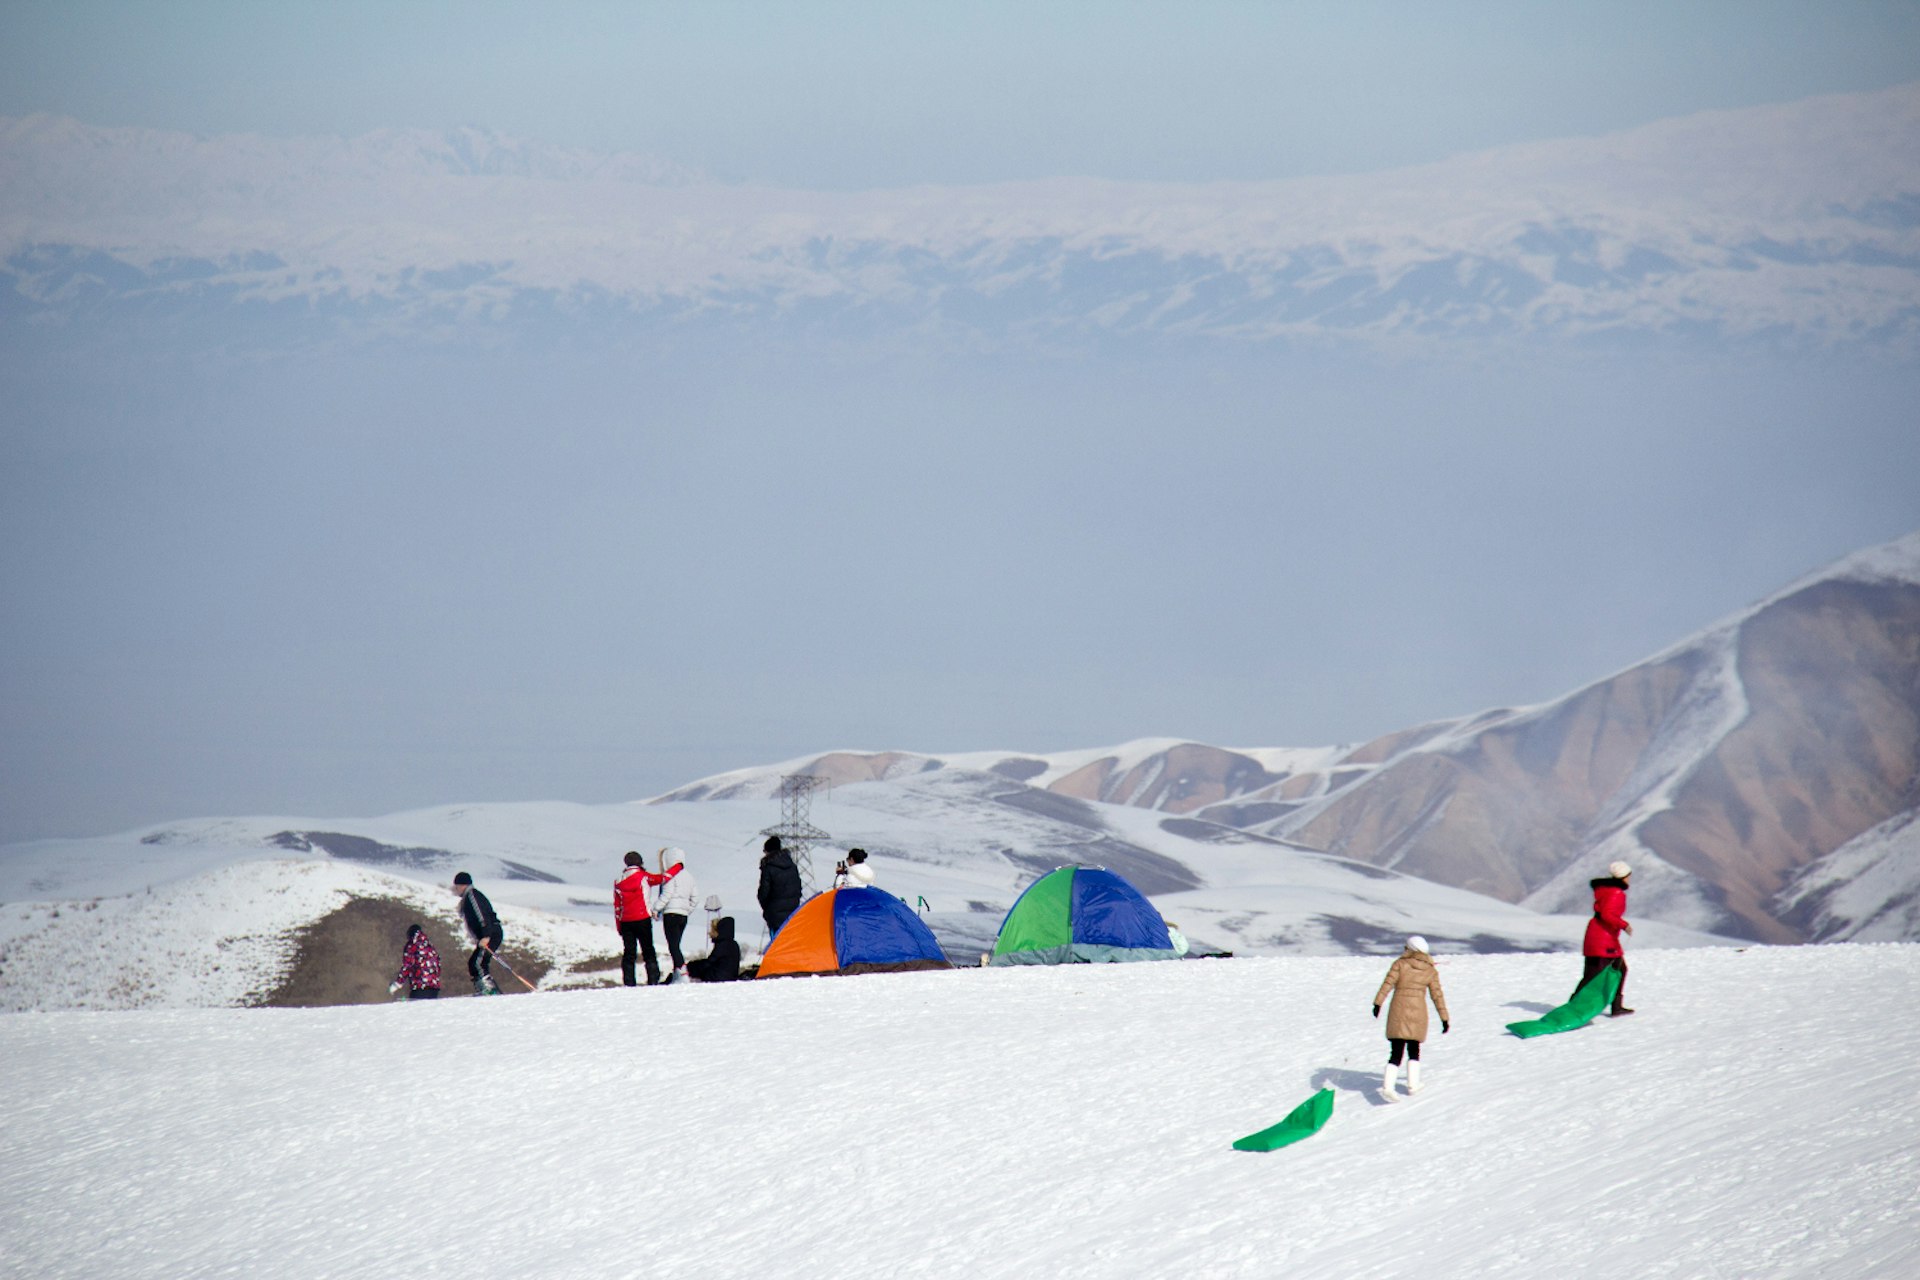 ZiL Ski Base is within easy reach of Bishkek © Stephen Lioy / Lonely Planet